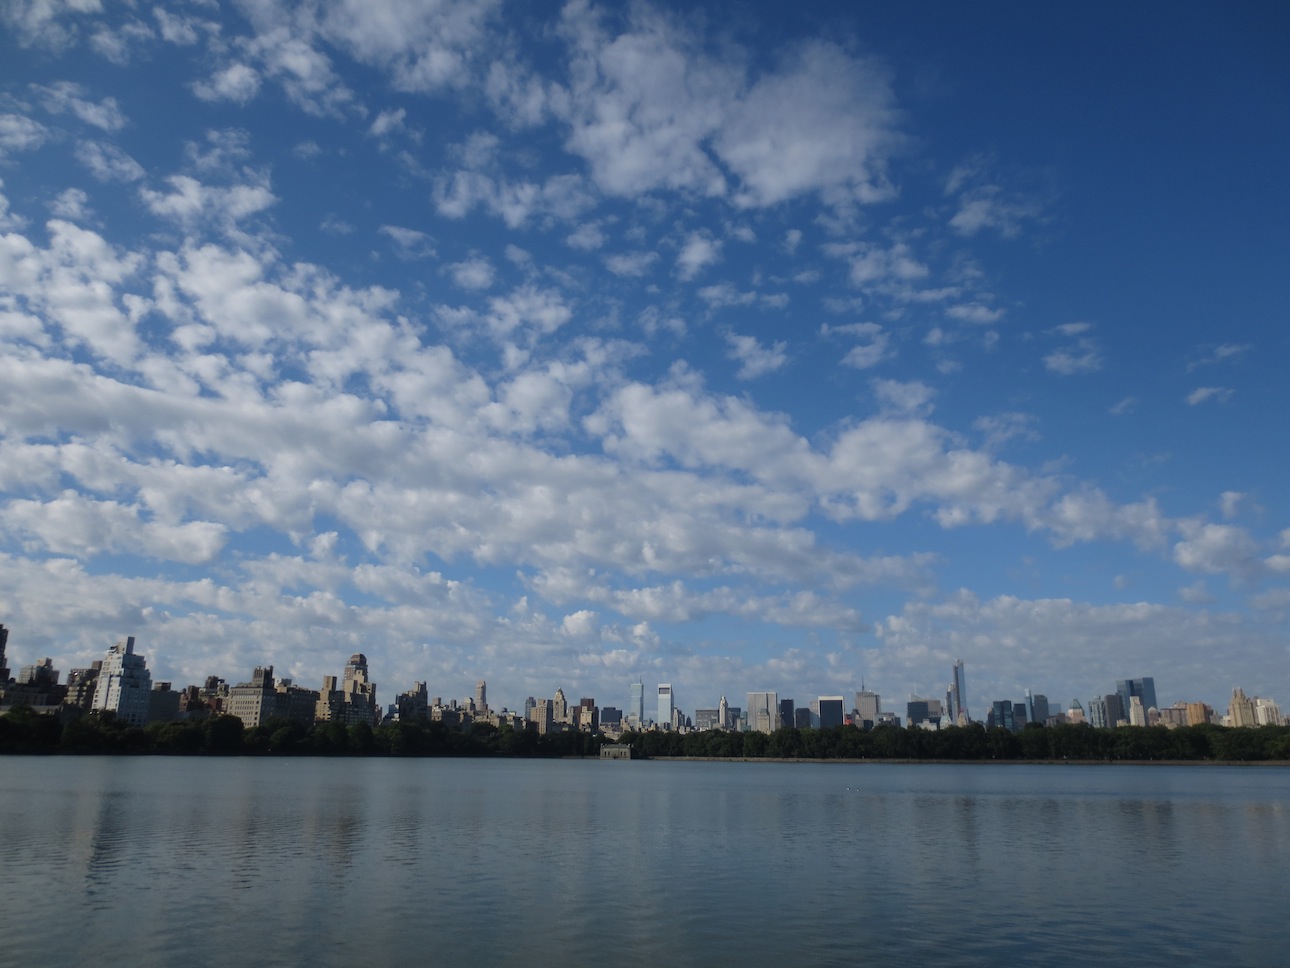 NYC skyline view from the Jacqueline Kennedy Onassis Reservoir.